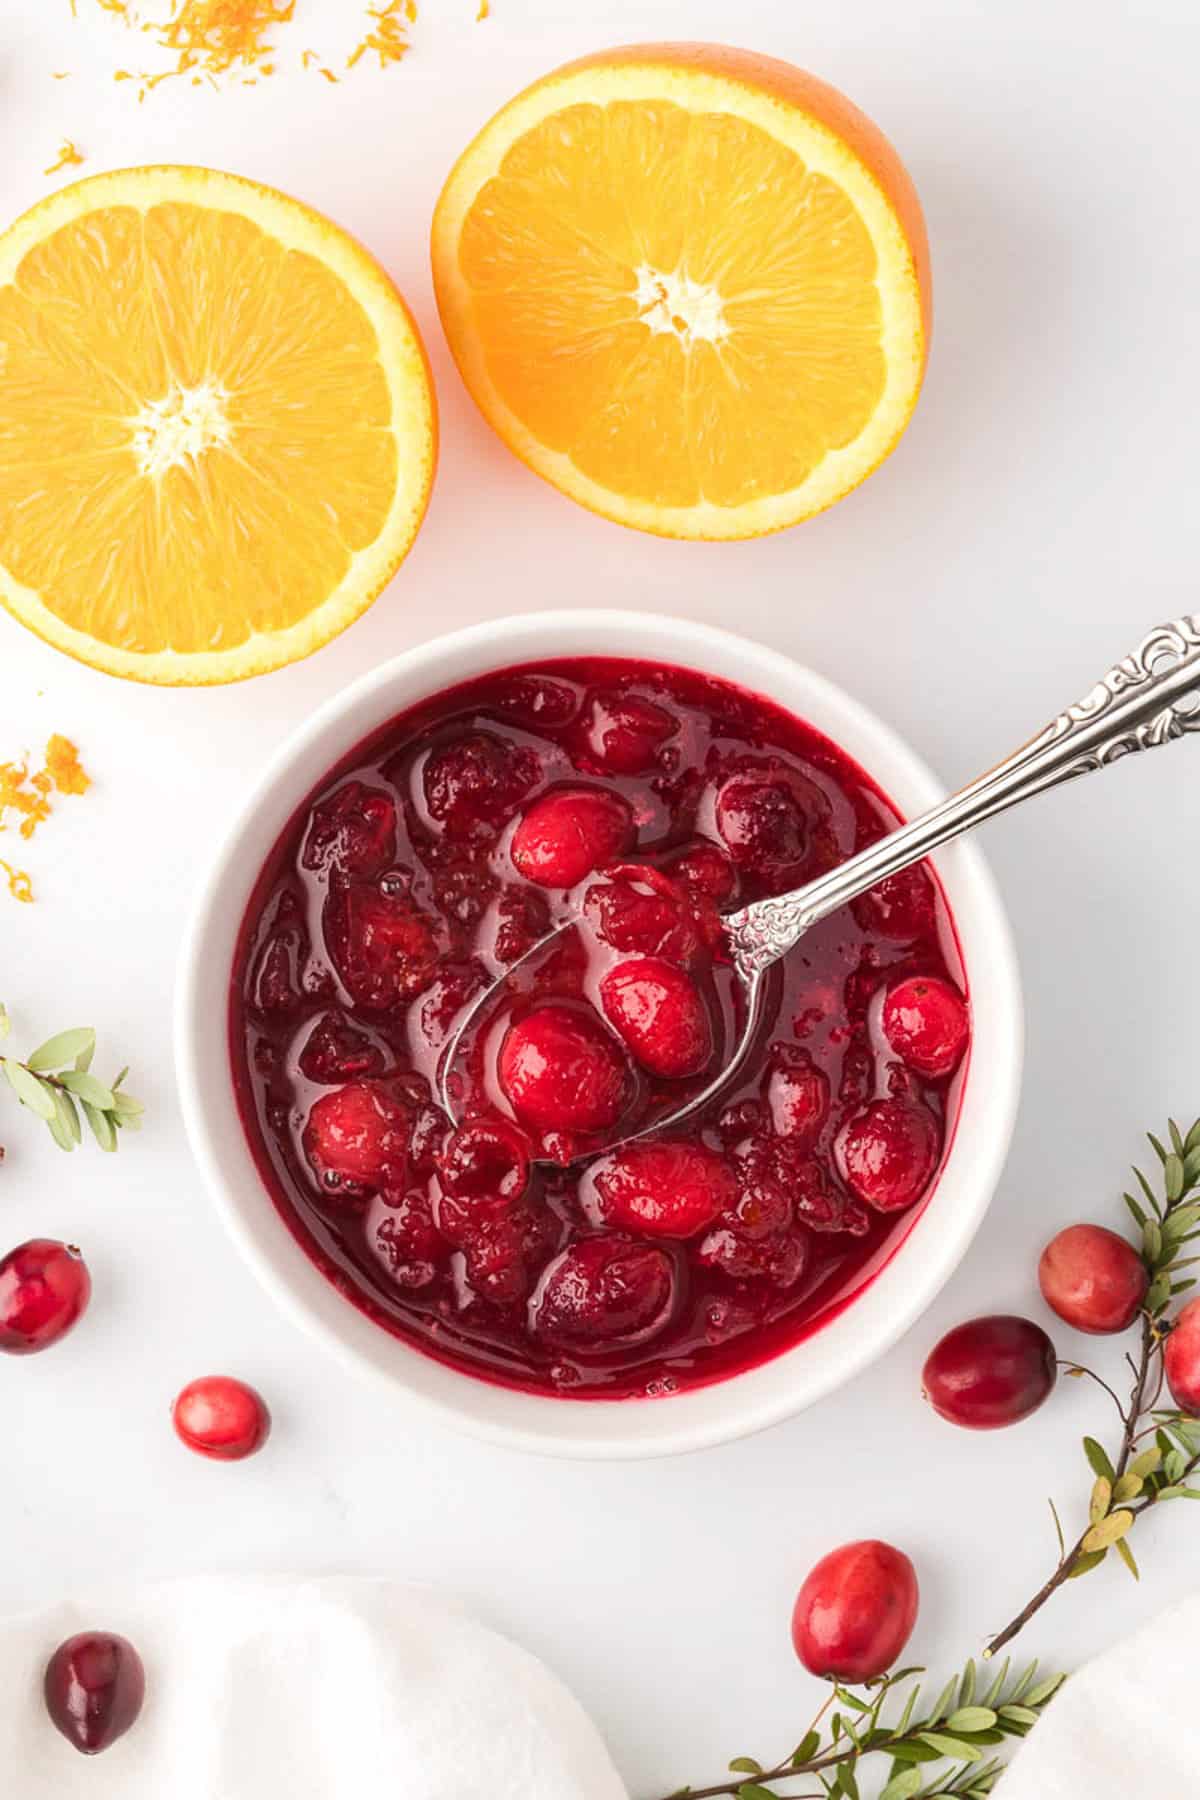 Overhead view of cranberry sauce in white ramekin with orange slices in the background.